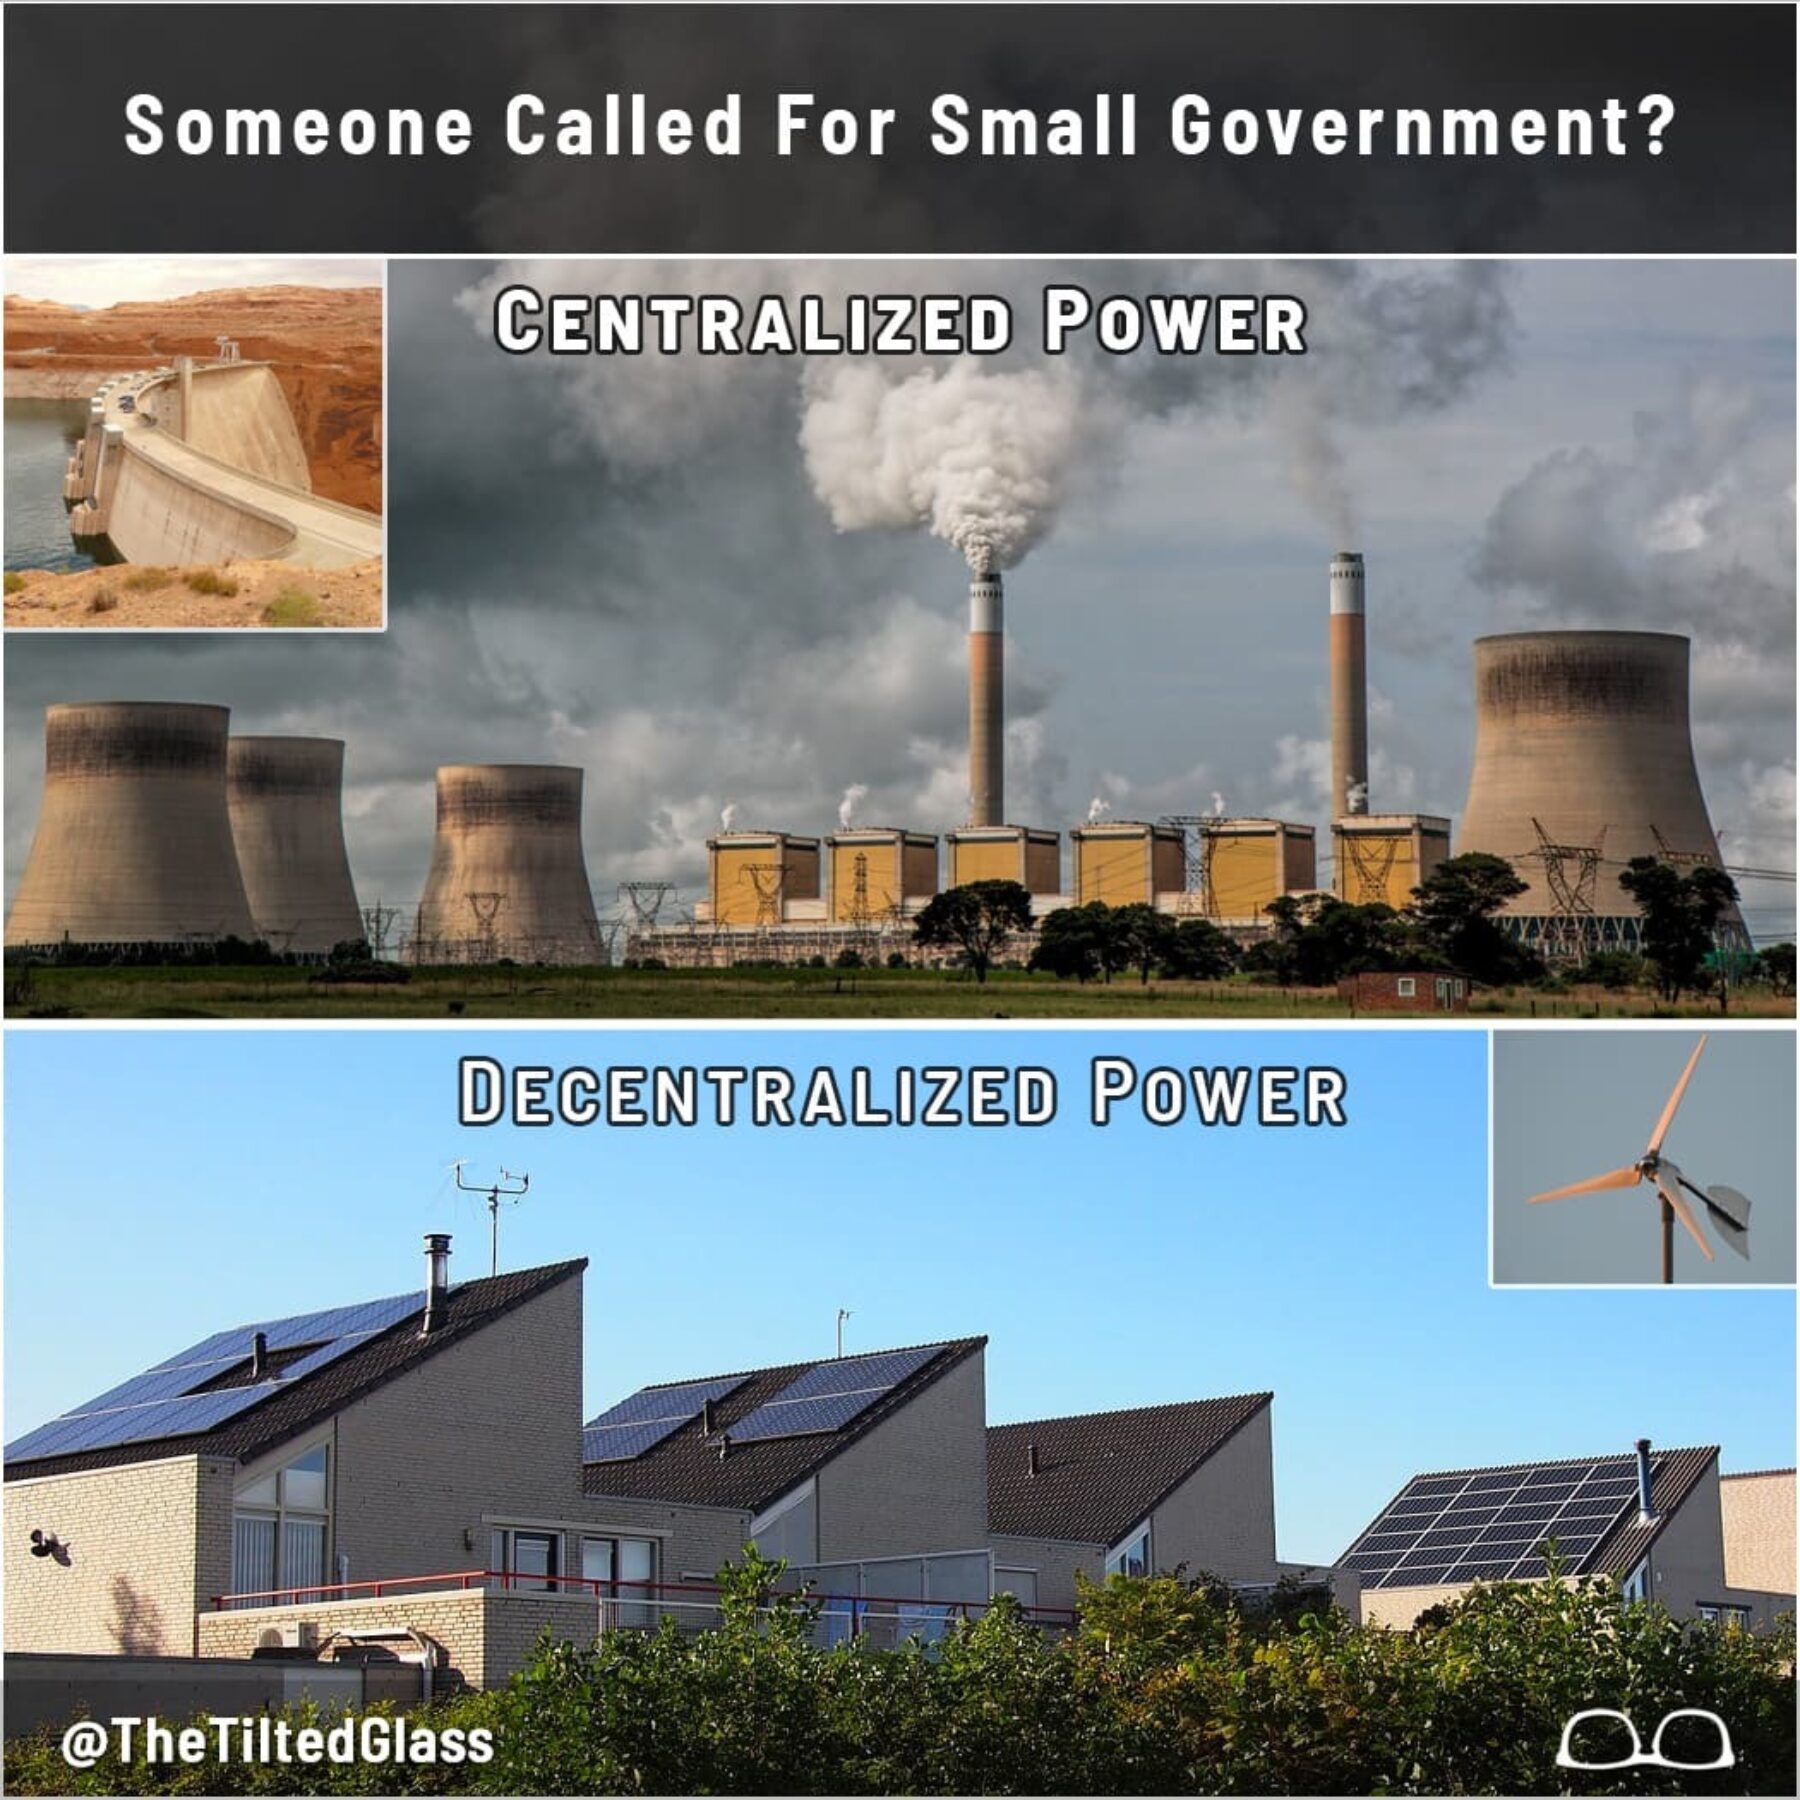 Someone Called For Small Government?